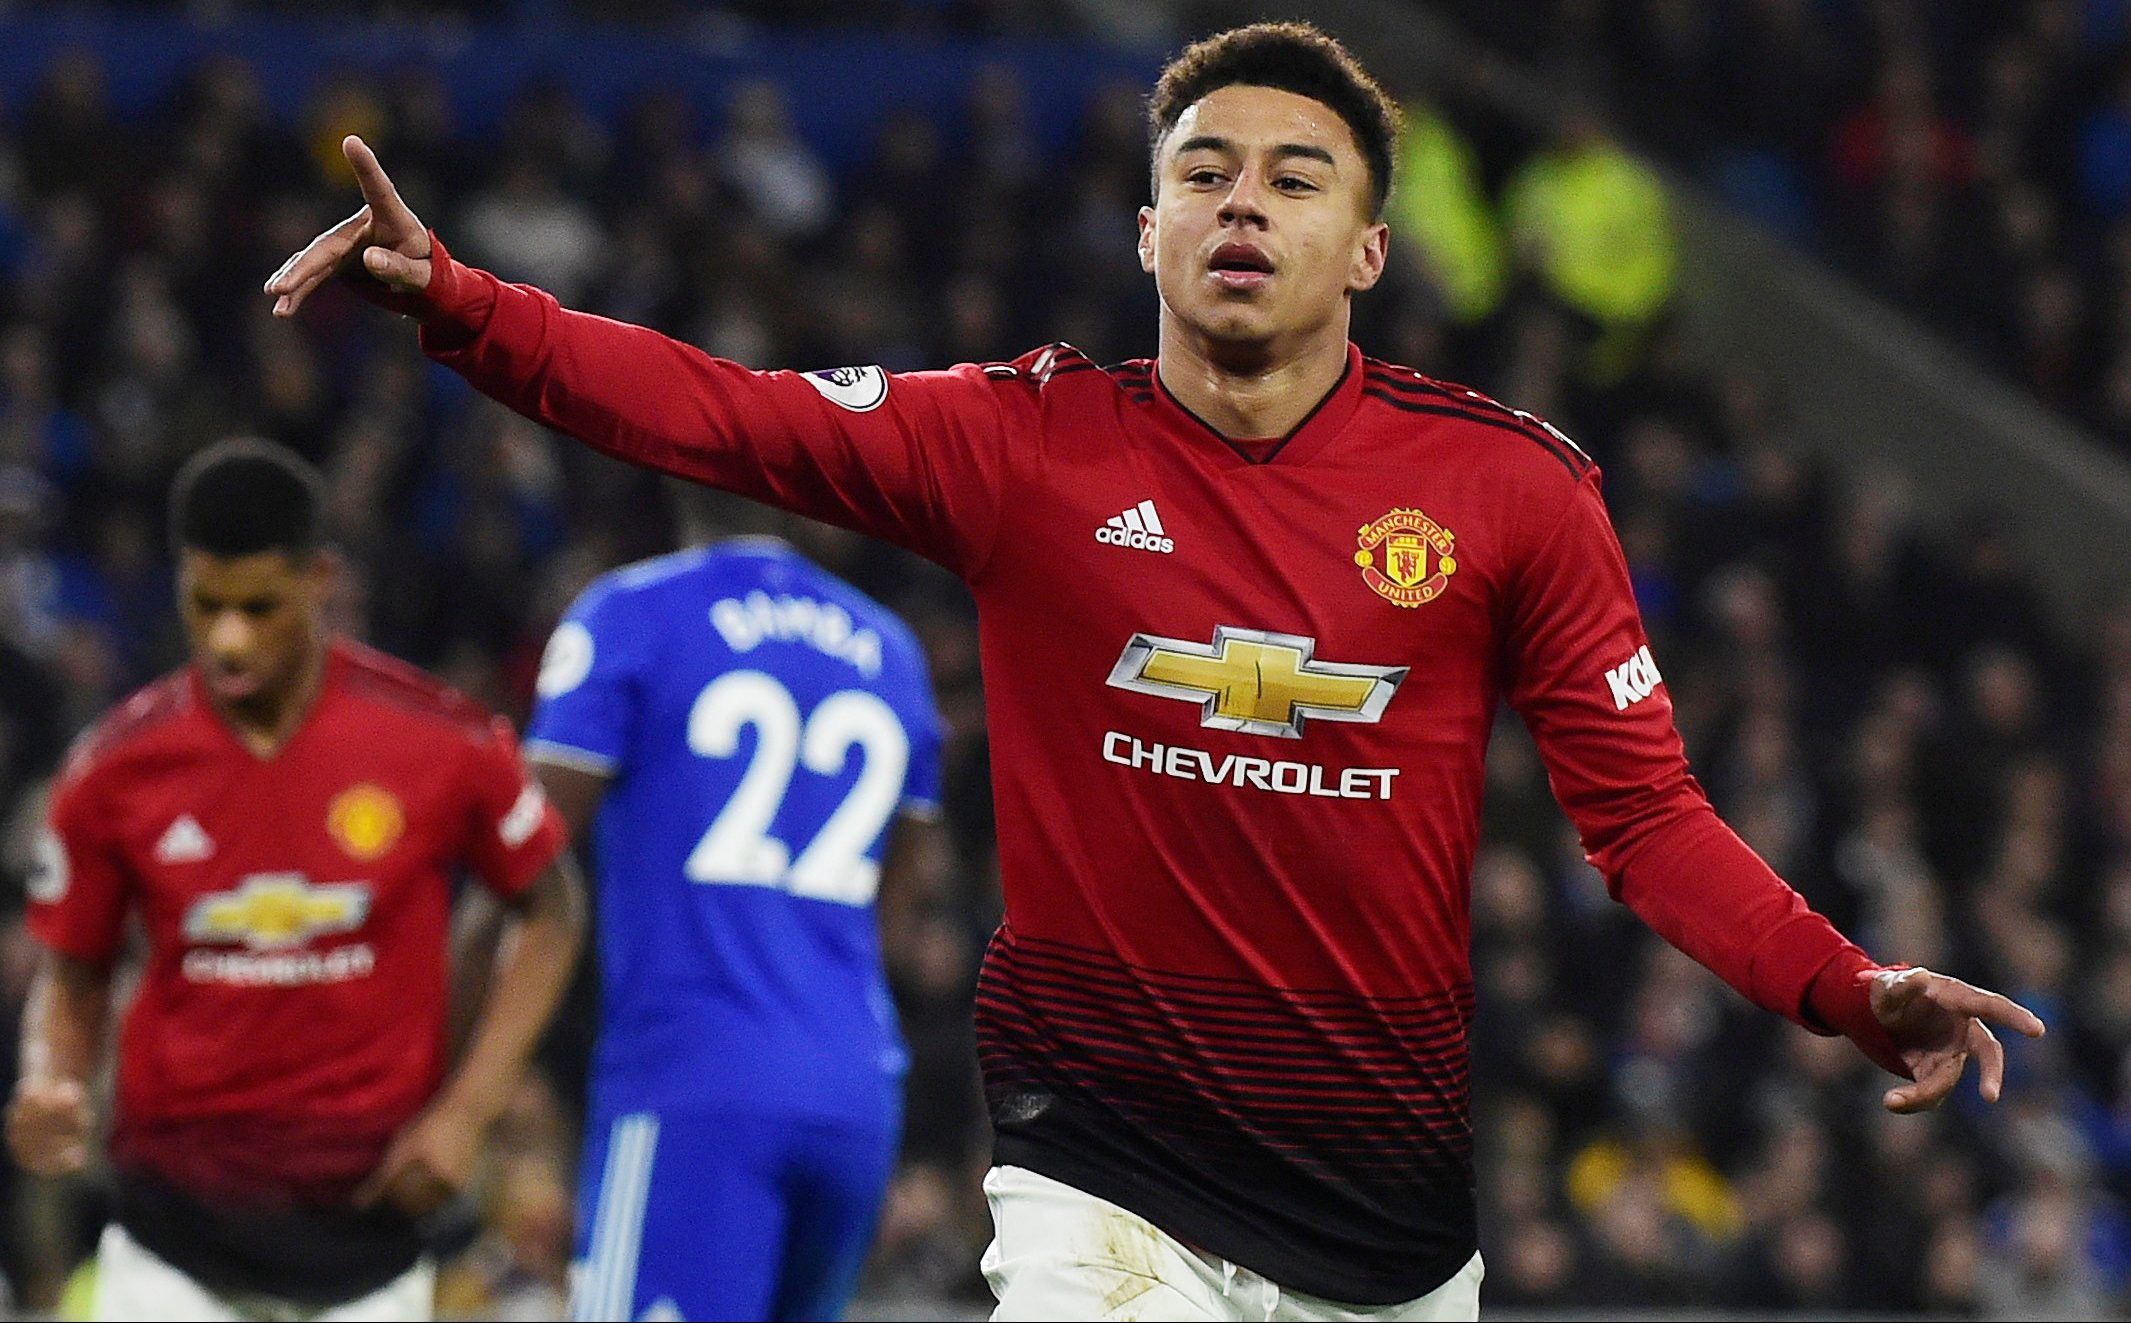 Soccer Football - Premier League - Cardiff City v Manchester United - Cardiff City Stadium, Cardiff, Britain - December 22, 2018  Manchester United's Jesse Lingard celebrates scoring their fourth goal   REUTERS/Rebecca Naden  EDITORIAL USE ONLY. No use with unauthorized audio, video, data, fixture lists, club/league logos or 